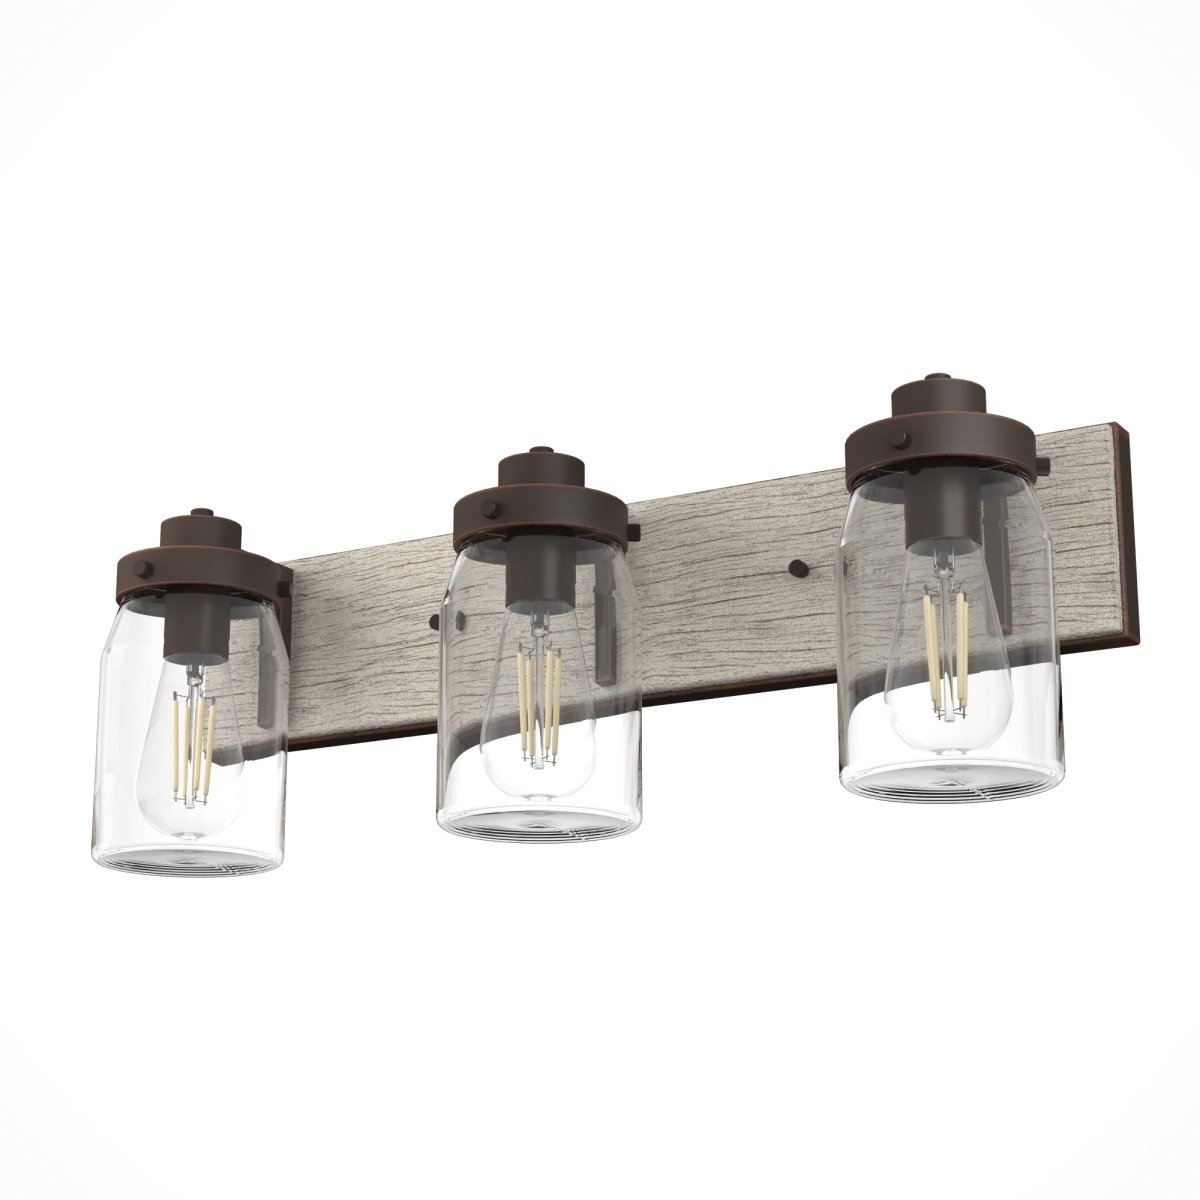 Picture of Hunter 48021 8.5 in. Devon Park Onyx Bengal & Barnwood with Clear Glass 3 Light Bathroom Vanity Wall Light Fixture